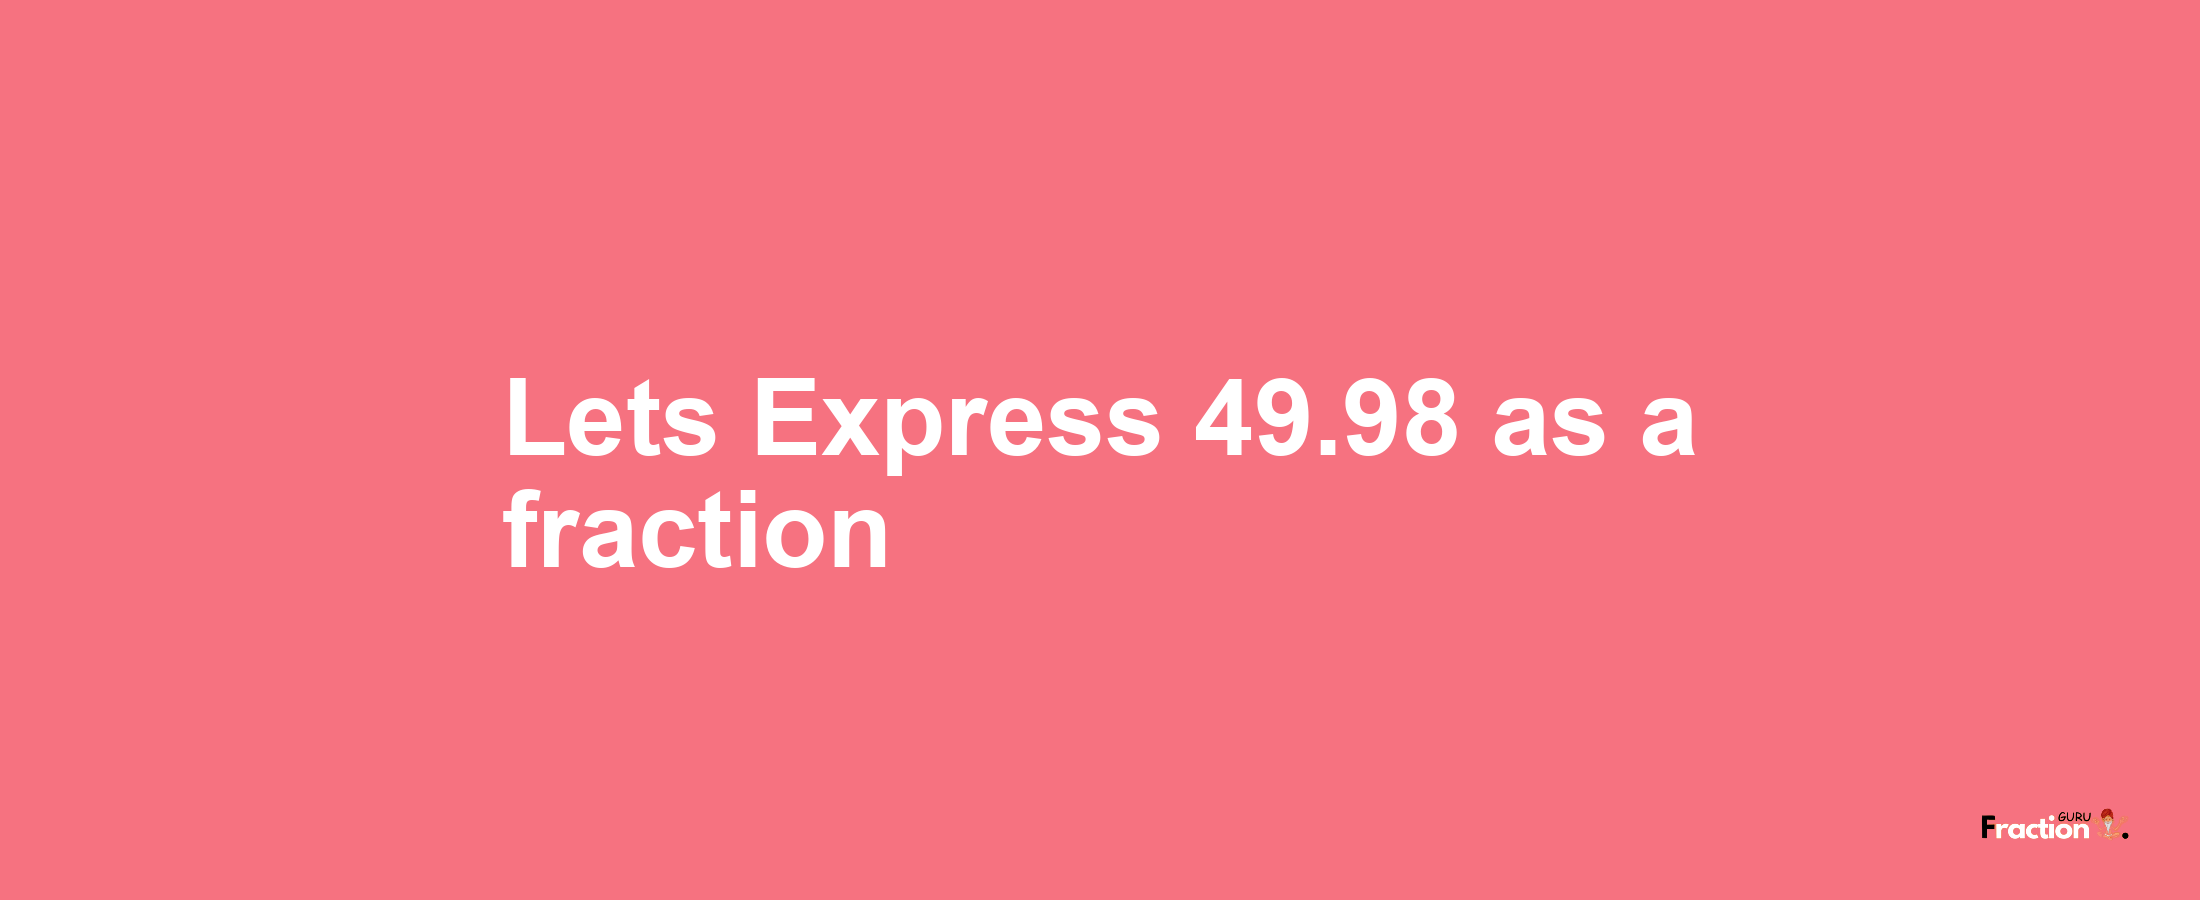 Lets Express 49.98 as afraction